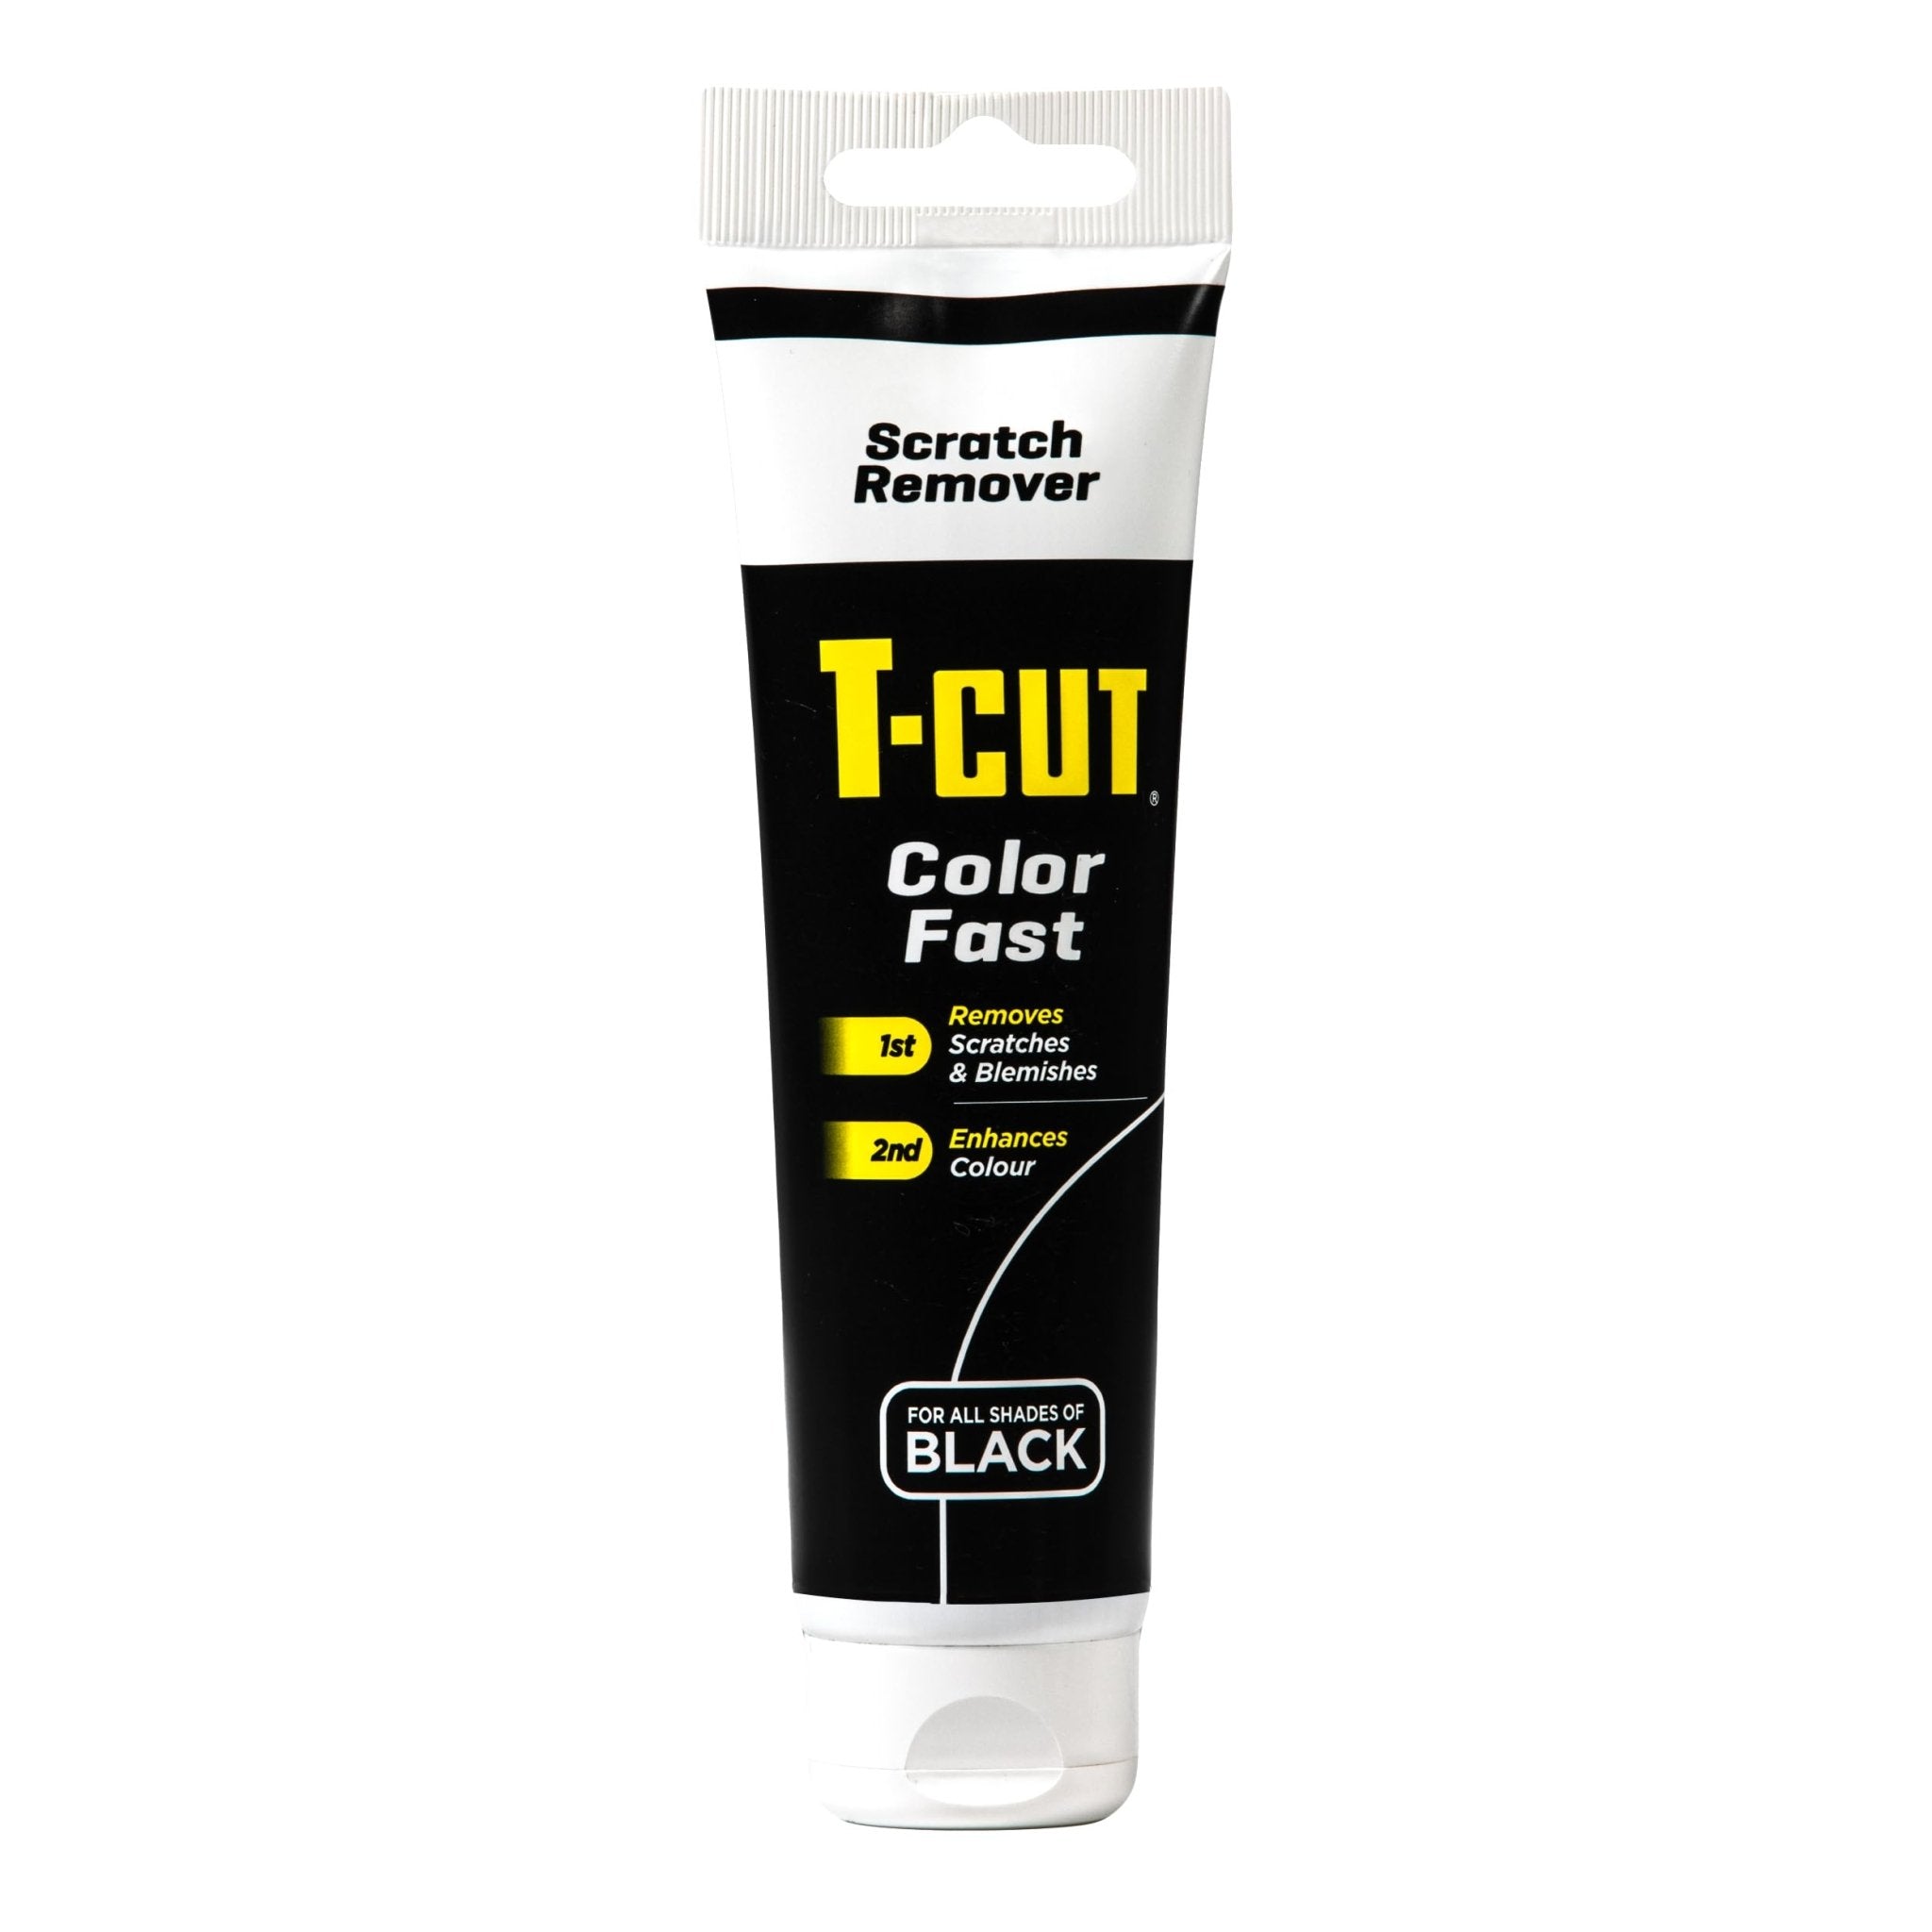 T Cut Color Fast Scratch Remover, Black, 150 g - Ammpoure Wellbeing